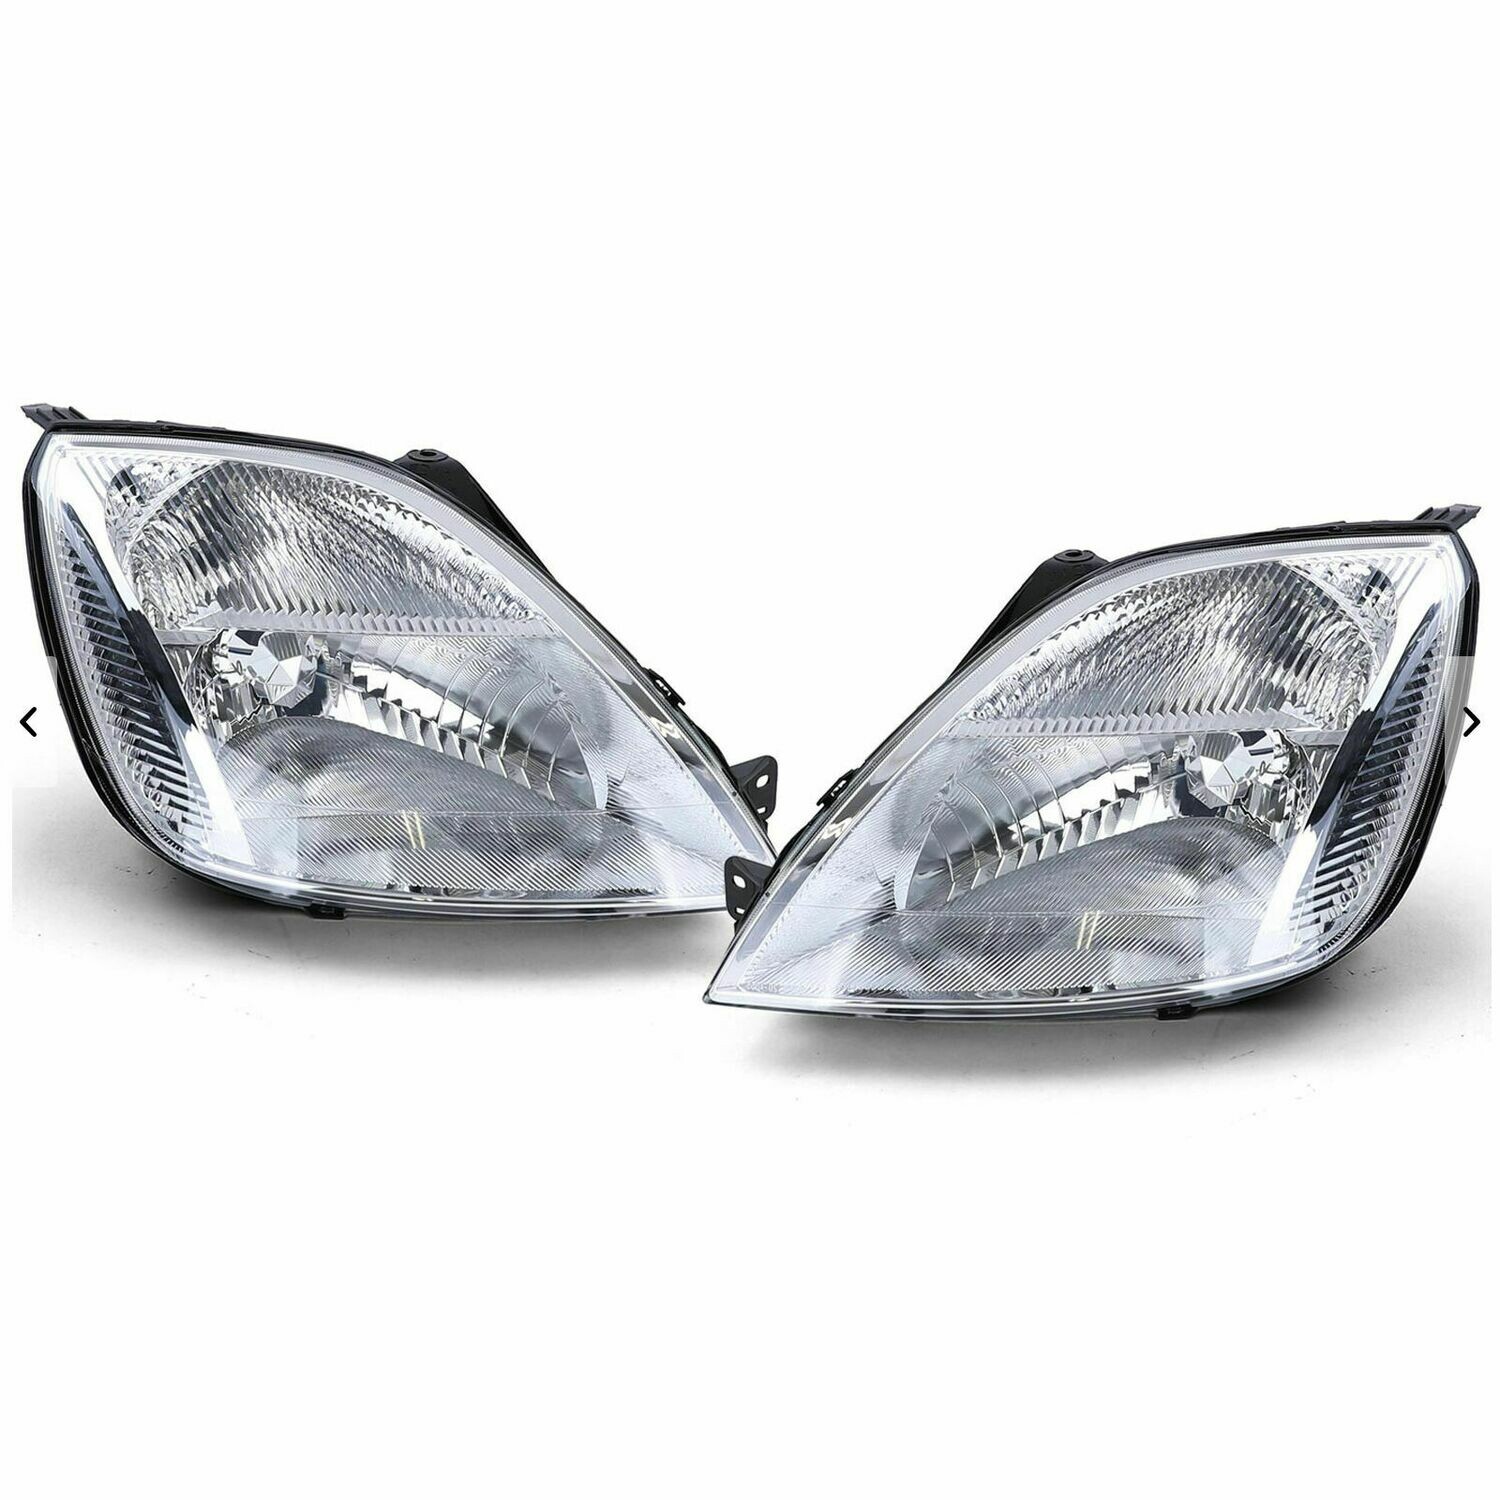 Front Headlights for FORD FIESTA 5 JH JD 02-05 NEW